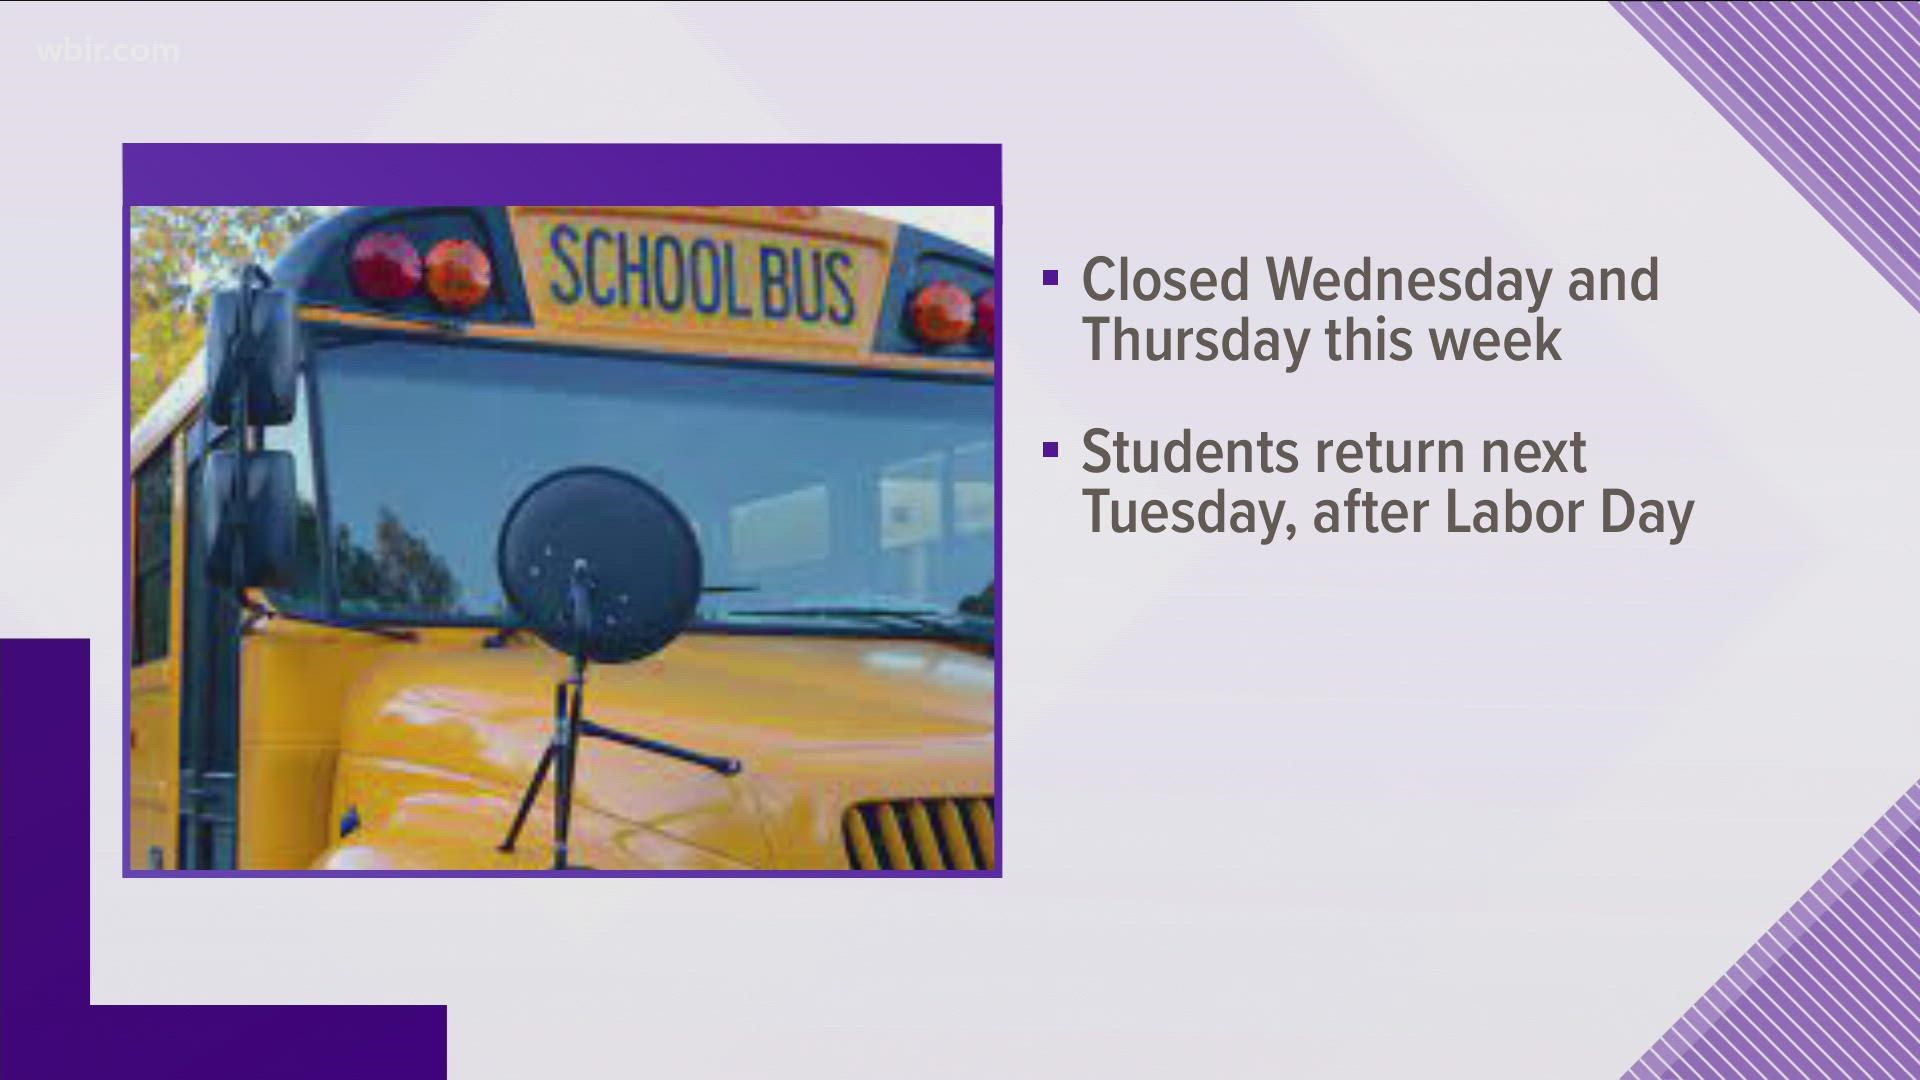 Sweetwater city schools and Monroe County schools will close Wednesday and Thursday this week due to COVID.